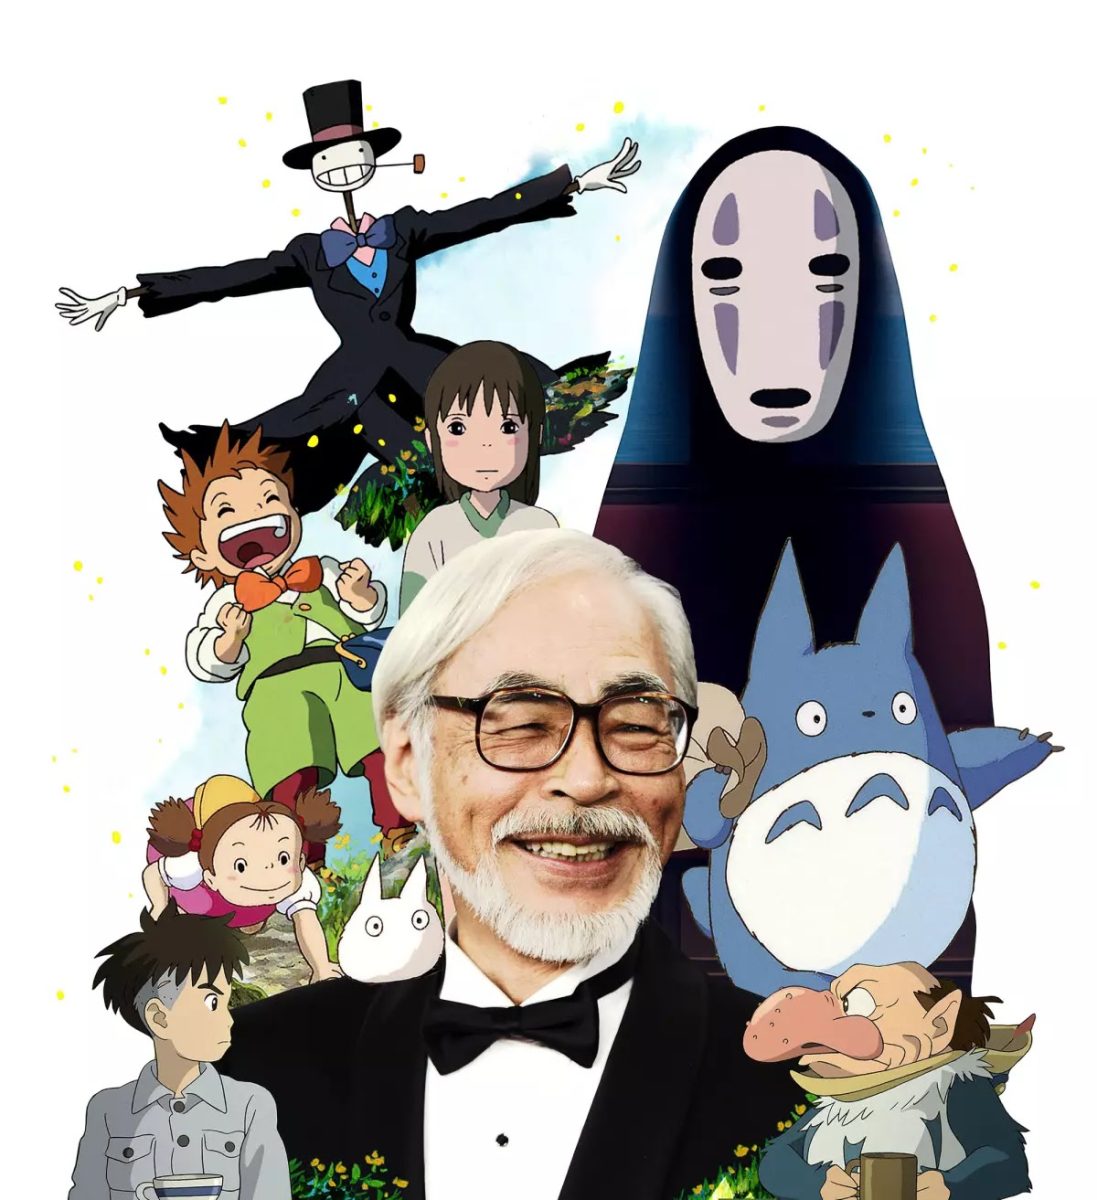  Director Hayao Miyazaki has produced an extensive collection of iconic Studio Ghibli films, with his latest addition maintaining his strong reputation (Photo from Los Angeles Times).